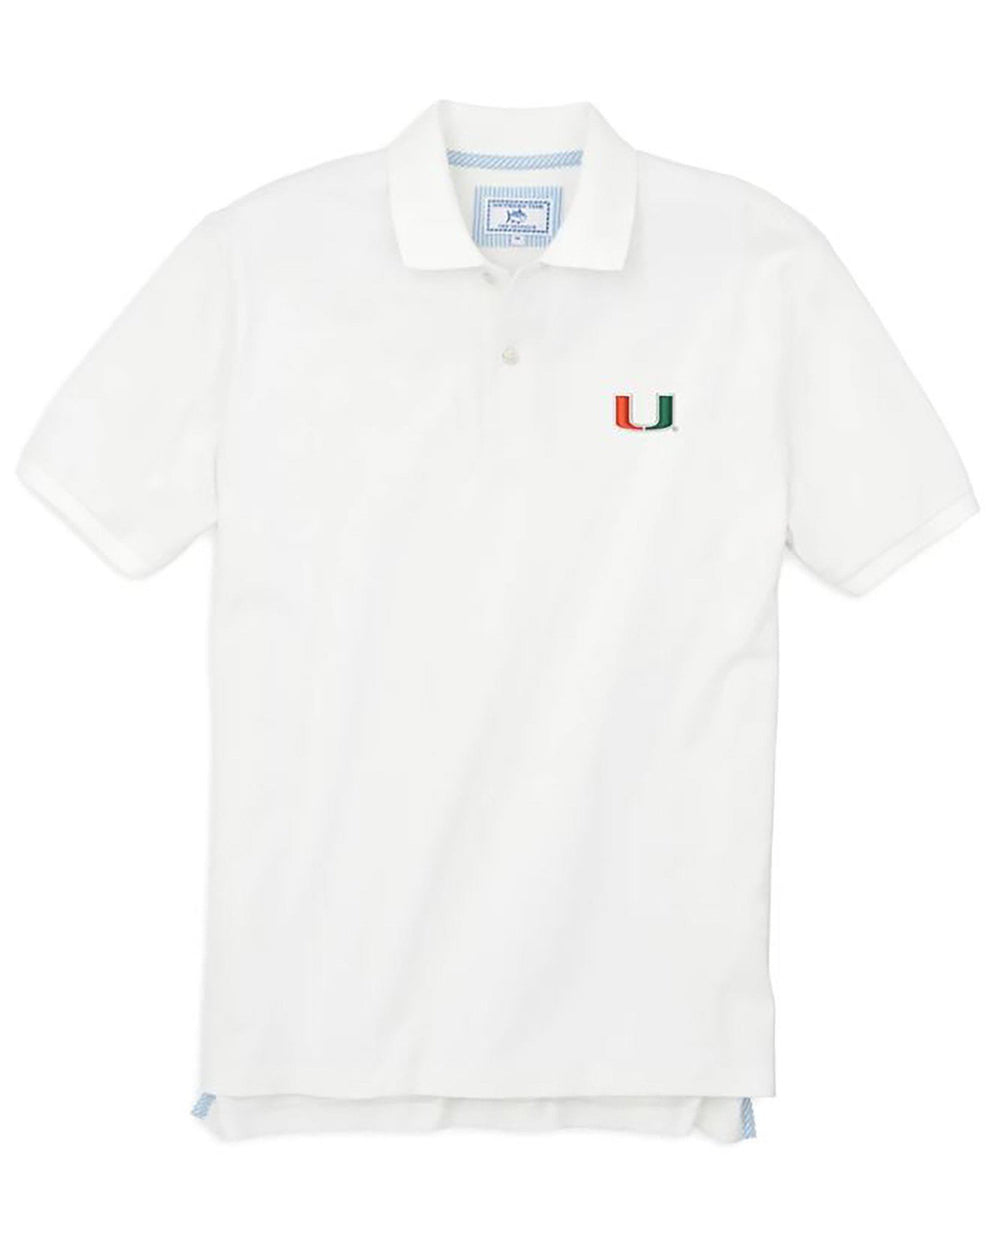 The front view of the Men's White Miami Hurricanes Pique Polo Shirt by Southern Tide - Classic White